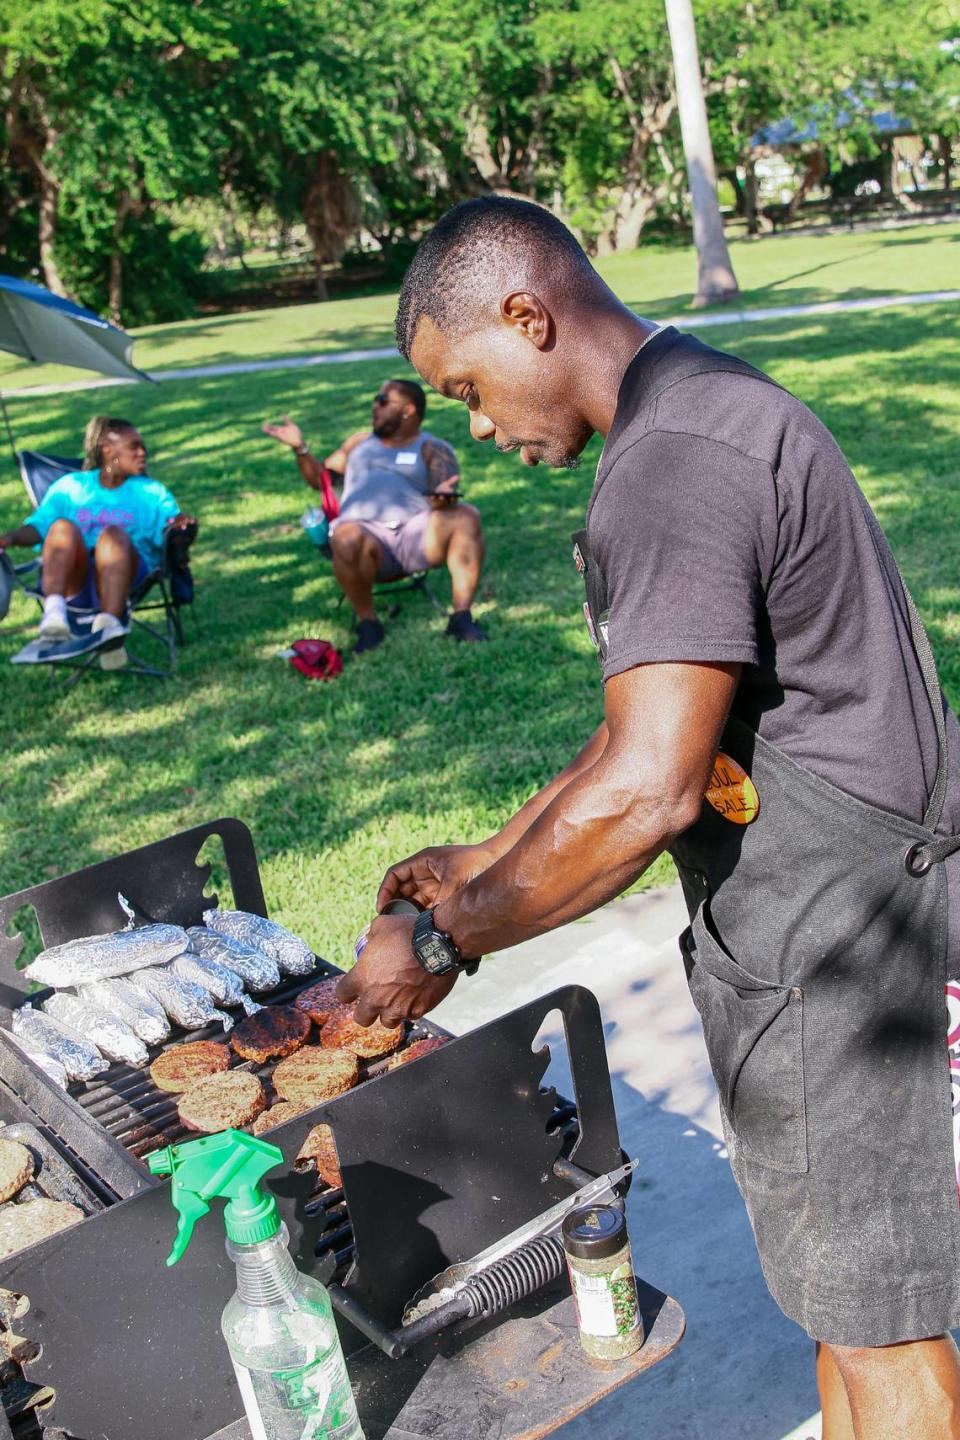 Poetry Potluck founder Calvin Early cooks at his gathering. Having started the Poetry Potluck at his home in 2018, Early will now partner with the city of Miami Gardens to host a “Family Cookout” on January 13 at the Betty T. Ferguson Recreational Complex.